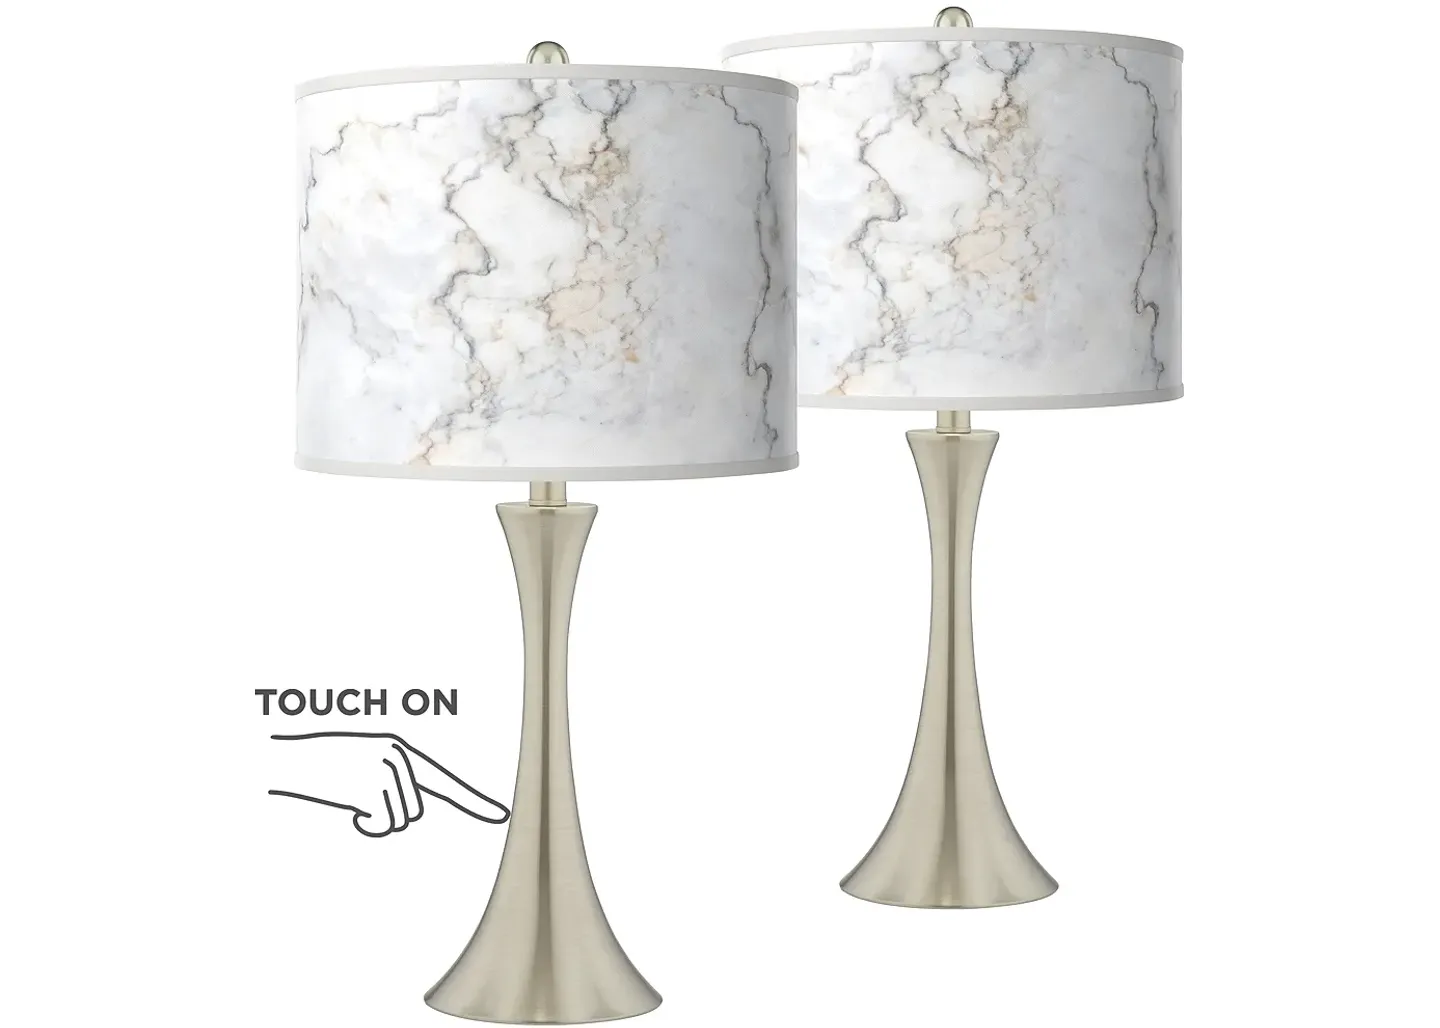 Giclee Glow Marble Glow Trish Brushed Nickel Touch Table Lamps Set of 2